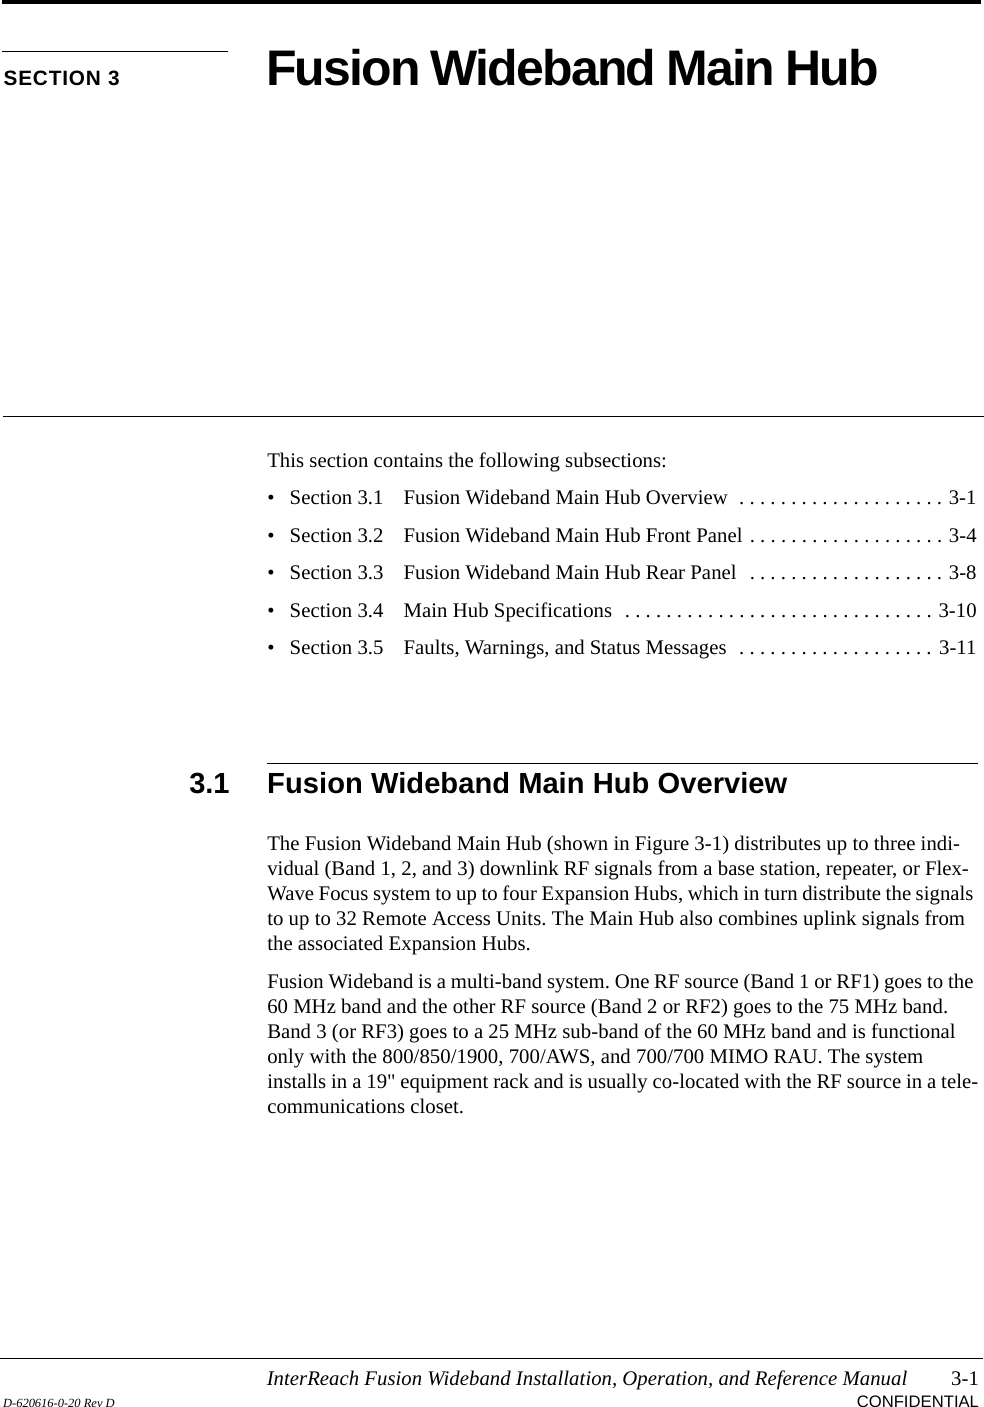 InterReach Fusion Wideband Installation, Operation, and Reference Manual 3-1D-620616-0-20 Rev D CONFIDENTIALSECTION 3 Fusion Wideband Main HubThis section contains the following subsections:• Section 3.1   Fusion Wideband Main Hub Overview  . . . . . . . . . . . . . . . . . . . . 3-1• Section 3.2   Fusion Wideband Main Hub Front Panel . . . . . . . . . . . . . . . . . . . 3-4• Section 3.3   Fusion Wideband Main Hub Rear Panel  . . . . . . . . . . . . . . . . . . . 3-8• Section 3.4   Main Hub Specifications  . . . . . . . . . . . . . . . . . . . . . . . . . . . . . . 3-10• Section 3.5   Faults, Warnings, and Status Messages  . . . . . . . . . . . . . . . . . . . 3-113.1 Fusion Wideband Main Hub OverviewThe Fusion Wideband Main Hub (shown in Figure 3-1) distributes up to three indi-vidual (Band 1, 2, and 3) downlink RF signals from a base station, repeater, or Flex-Wave Focus system to up to four Expansion Hubs, which in turn distribute the signals to up to 32 Remote Access Units. The Main Hub also combines uplink signals from the associated Expansion Hubs.Fusion Wideband is a multi-band system. One RF source (Band 1 or RF1) goes to the 60 MHz band and the other RF source (Band 2 or RF2) goes to the 75 MHz band. Band 3 (or RF3) goes to a 25 MHz sub-band of the 60 MHz band and is functional only with the 800/850/1900, 700/AWS, and 700/700 MIMO RAU. The system installs in a 19&quot; equipment rack and is usually co-located with the RF source in a tele-communications closet.